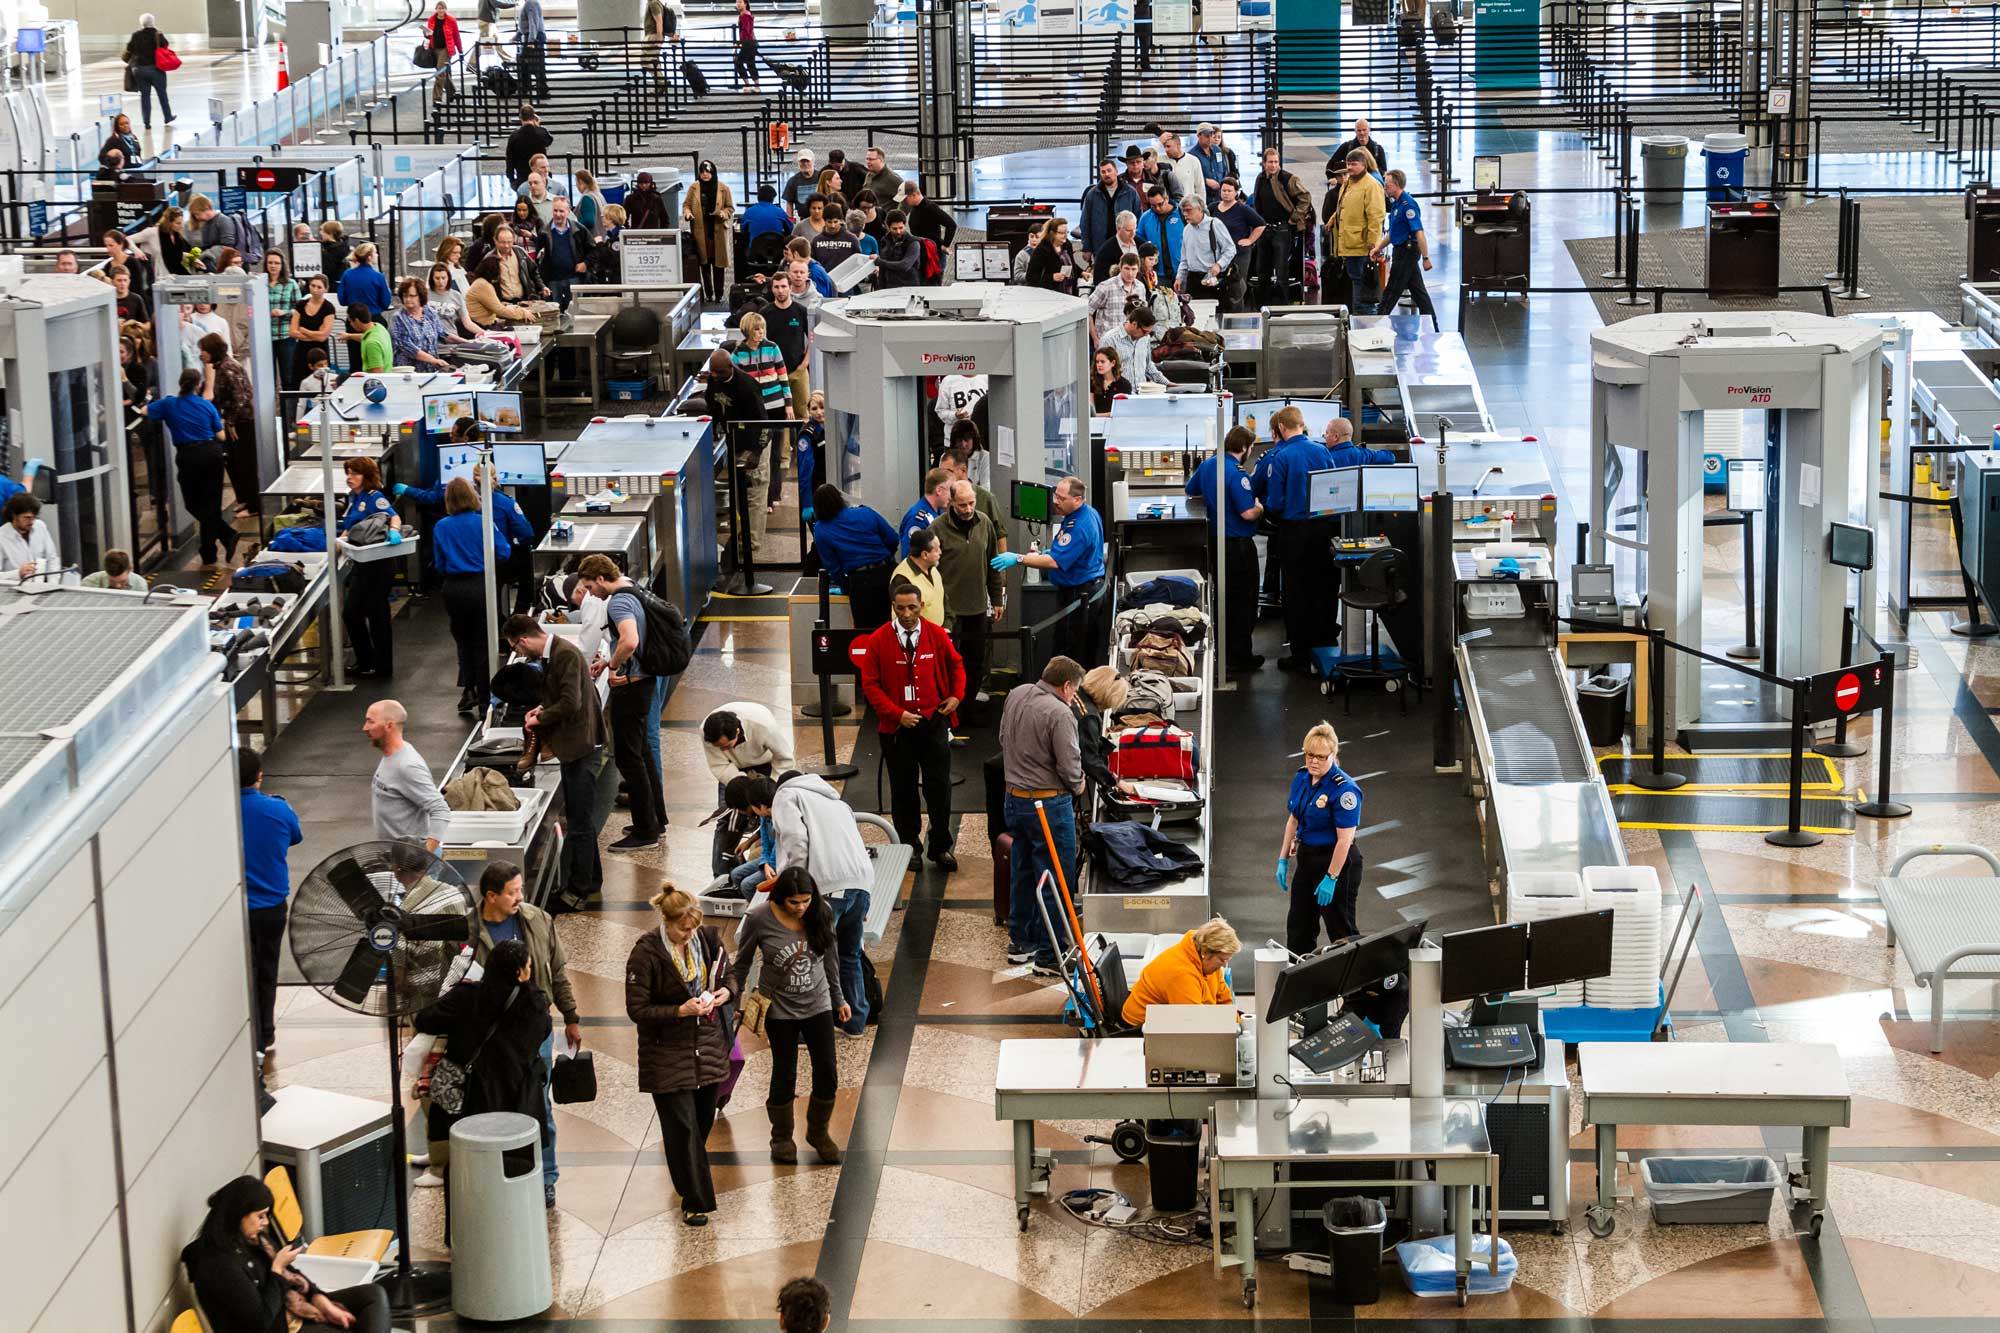 Demystifying TSA Guidelines for Water Bottles While Traveling on a Plane -  Healthy Human